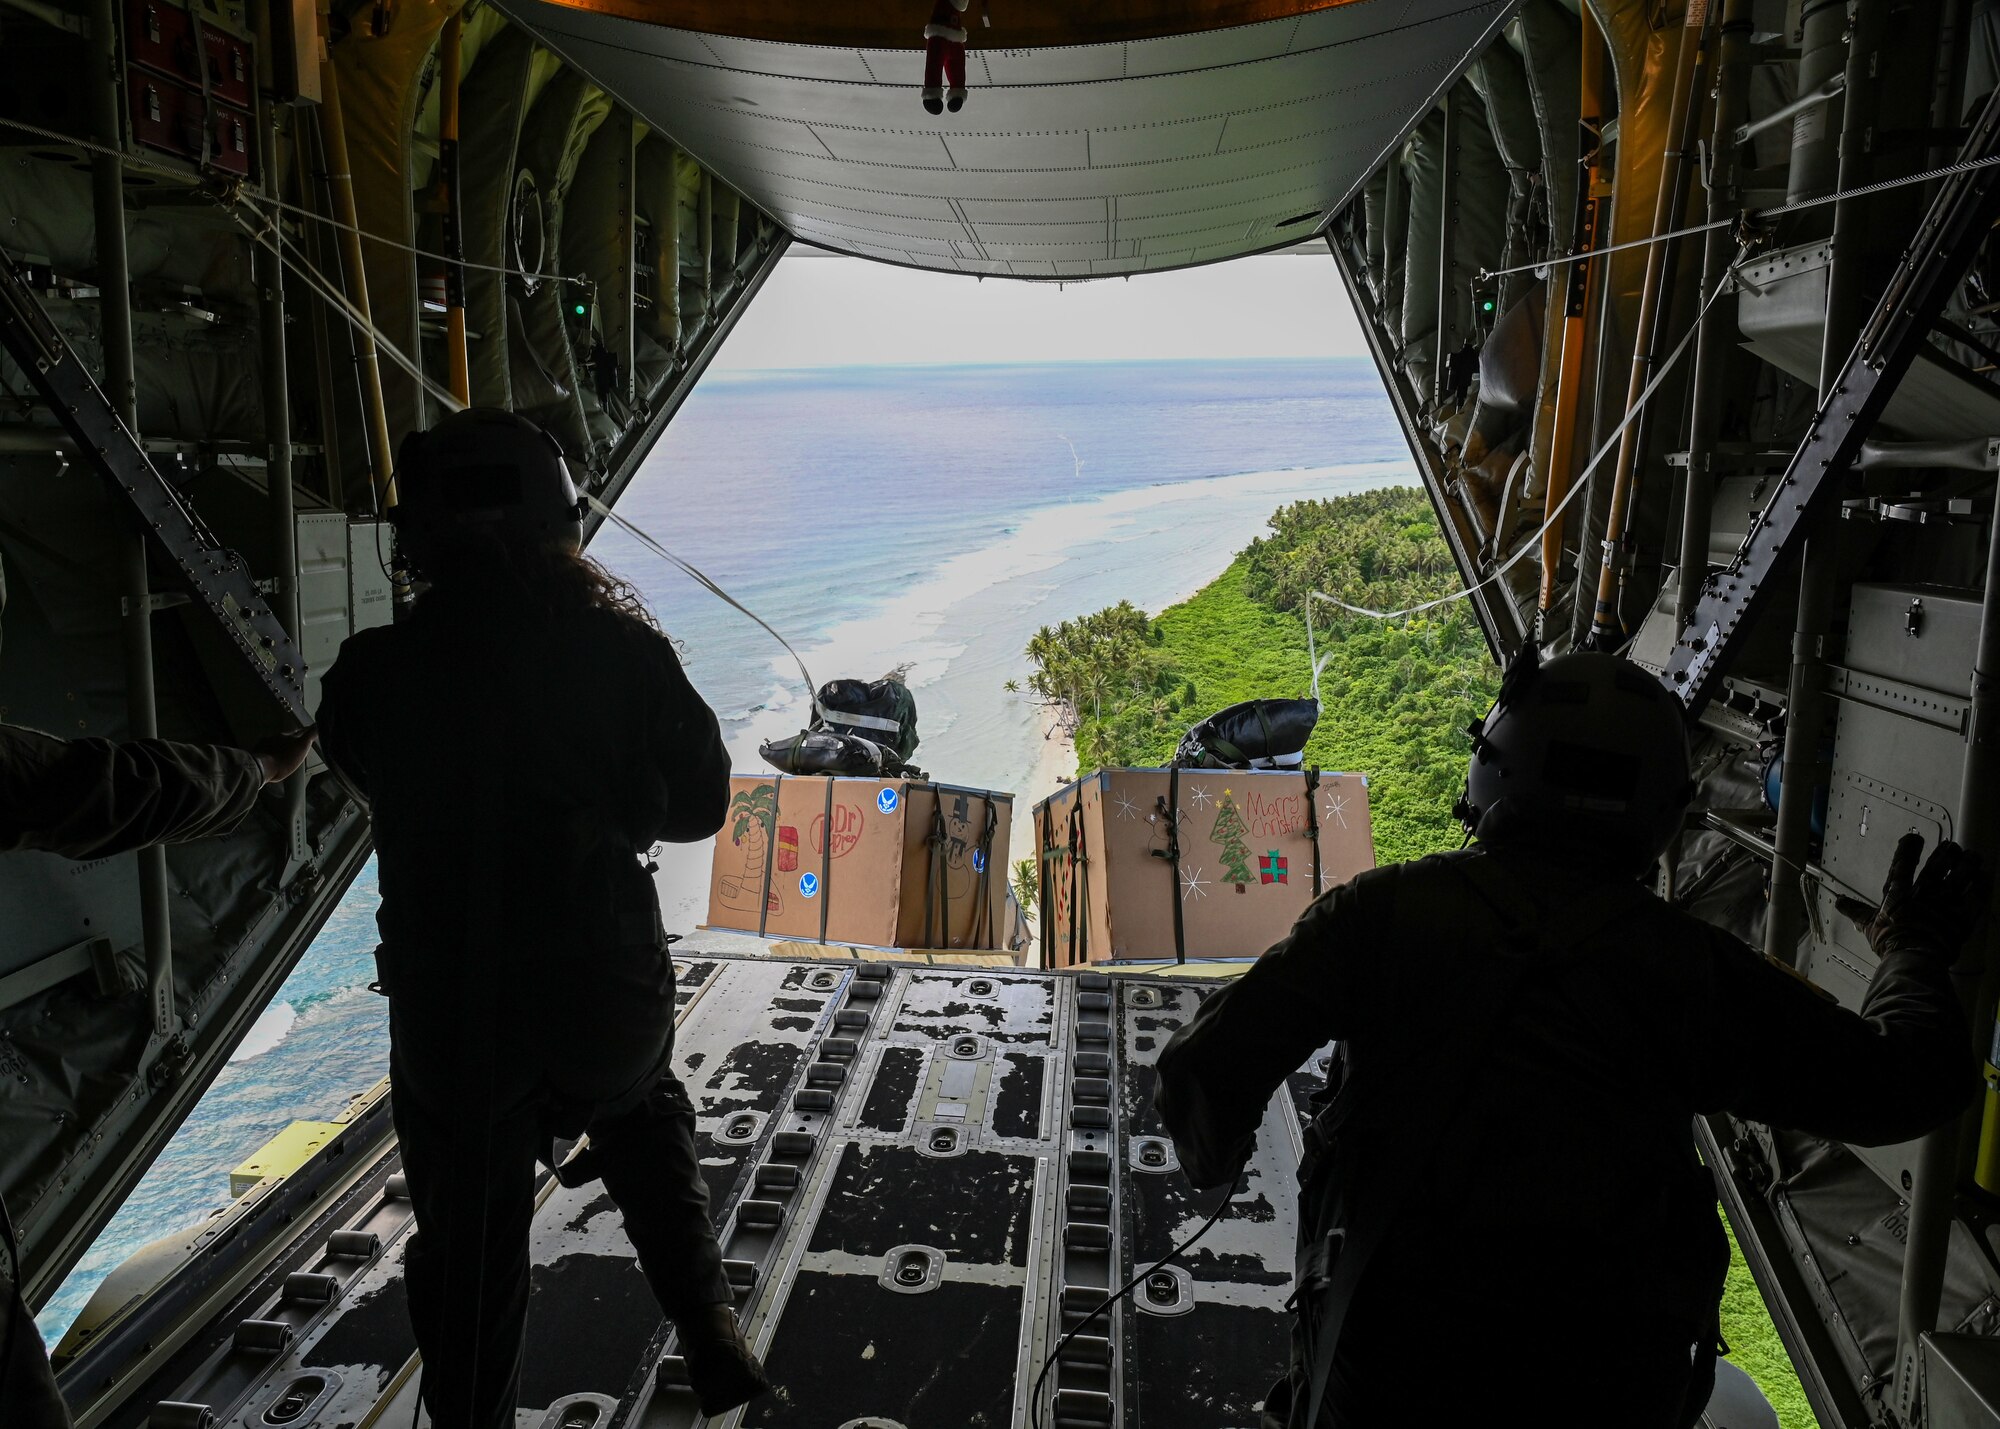 U.S. Air Force Senior Airman Kim Doyle, and U.S. Air Force Airman 1st Class Spencer Kans, loadmasters assigned to the 36th Airlift Squadron, Yokota Air Base, Japan, watch as bundles fly off an aircraft during Operation Christmas Drop at Andersen Air Force Base, Guam, Dec. 10, 2021. Over the course of 10 days, crews will airdrop donated food, clothing, educational materials, and tools to 55 islanders throughout the South-Eastern Pacific, including the Federated States of Micronesia, and the Republic of Palau. (U.S. Air Force photo by Senior Airman Aubree Owens)